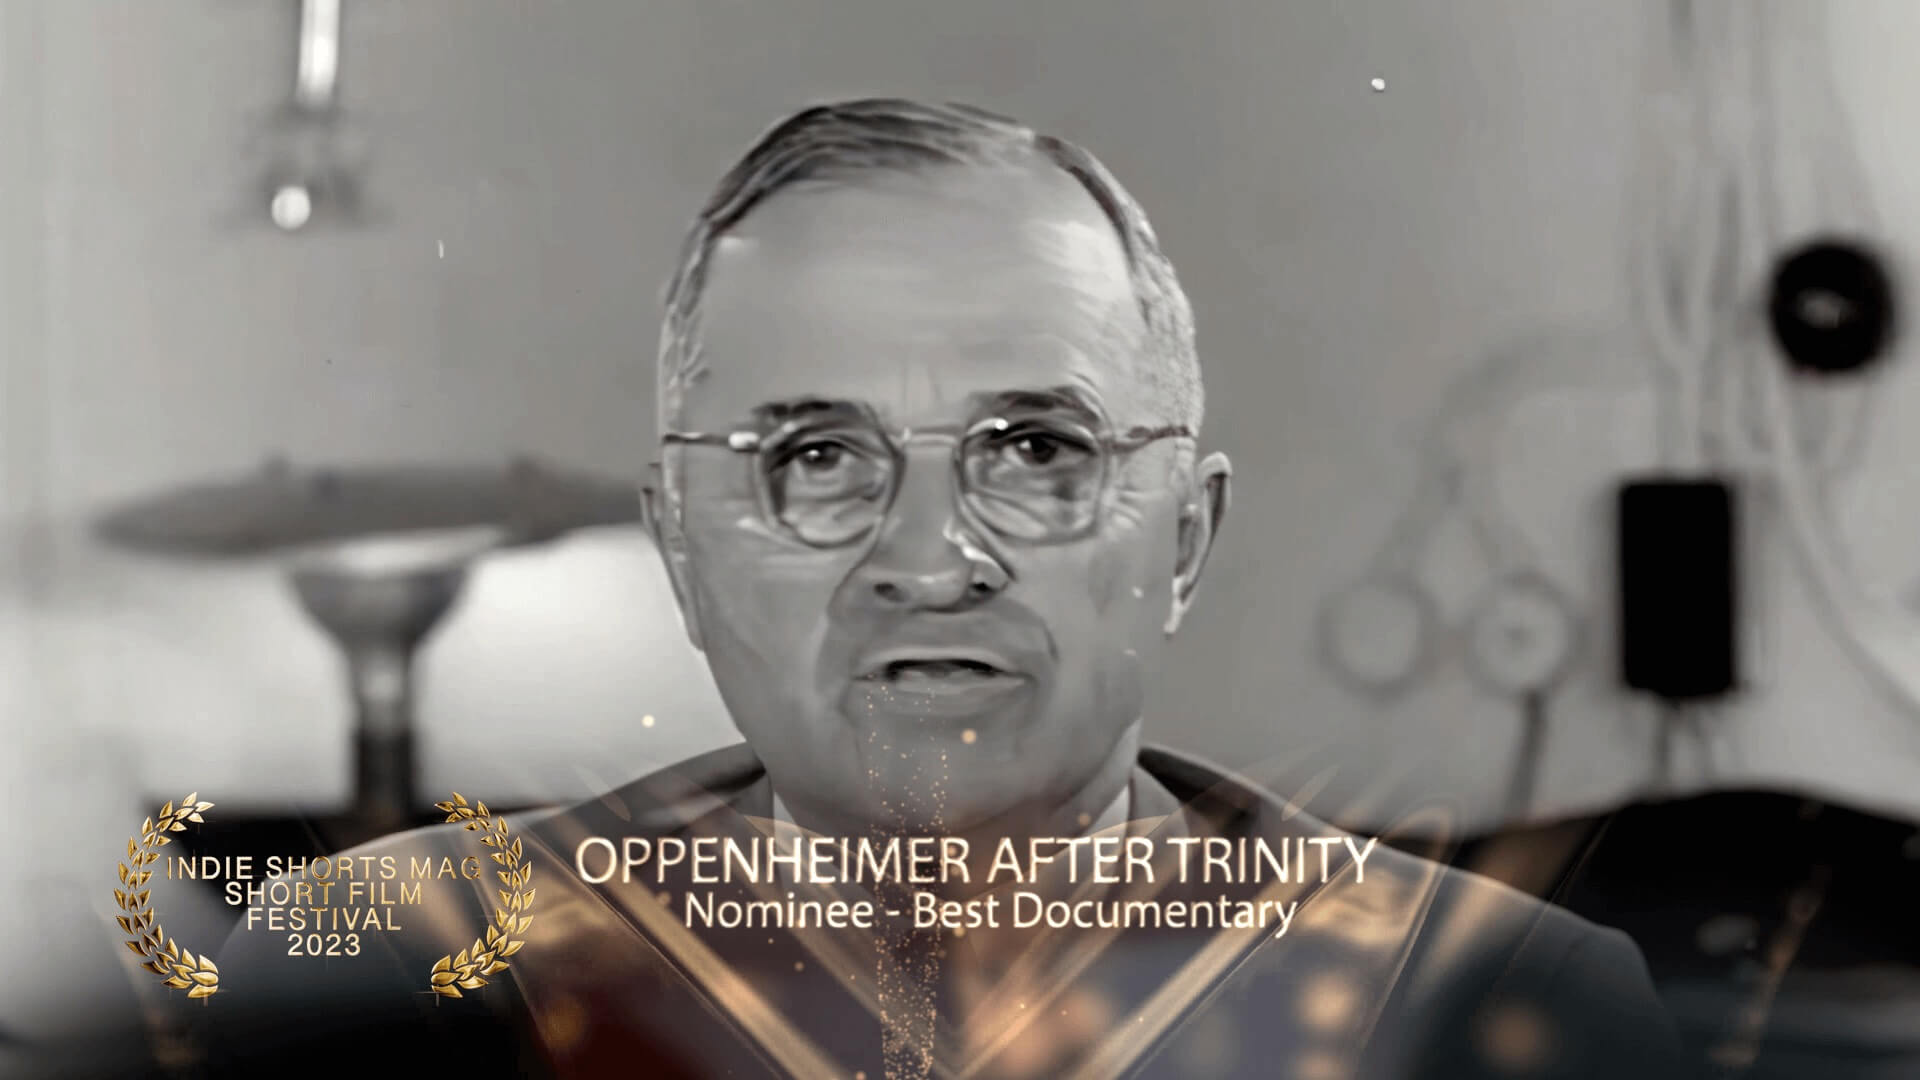 Indie Shorts Mag Short Film Festival - Best Documntary - Nominees - Oppenheimer After Trinity